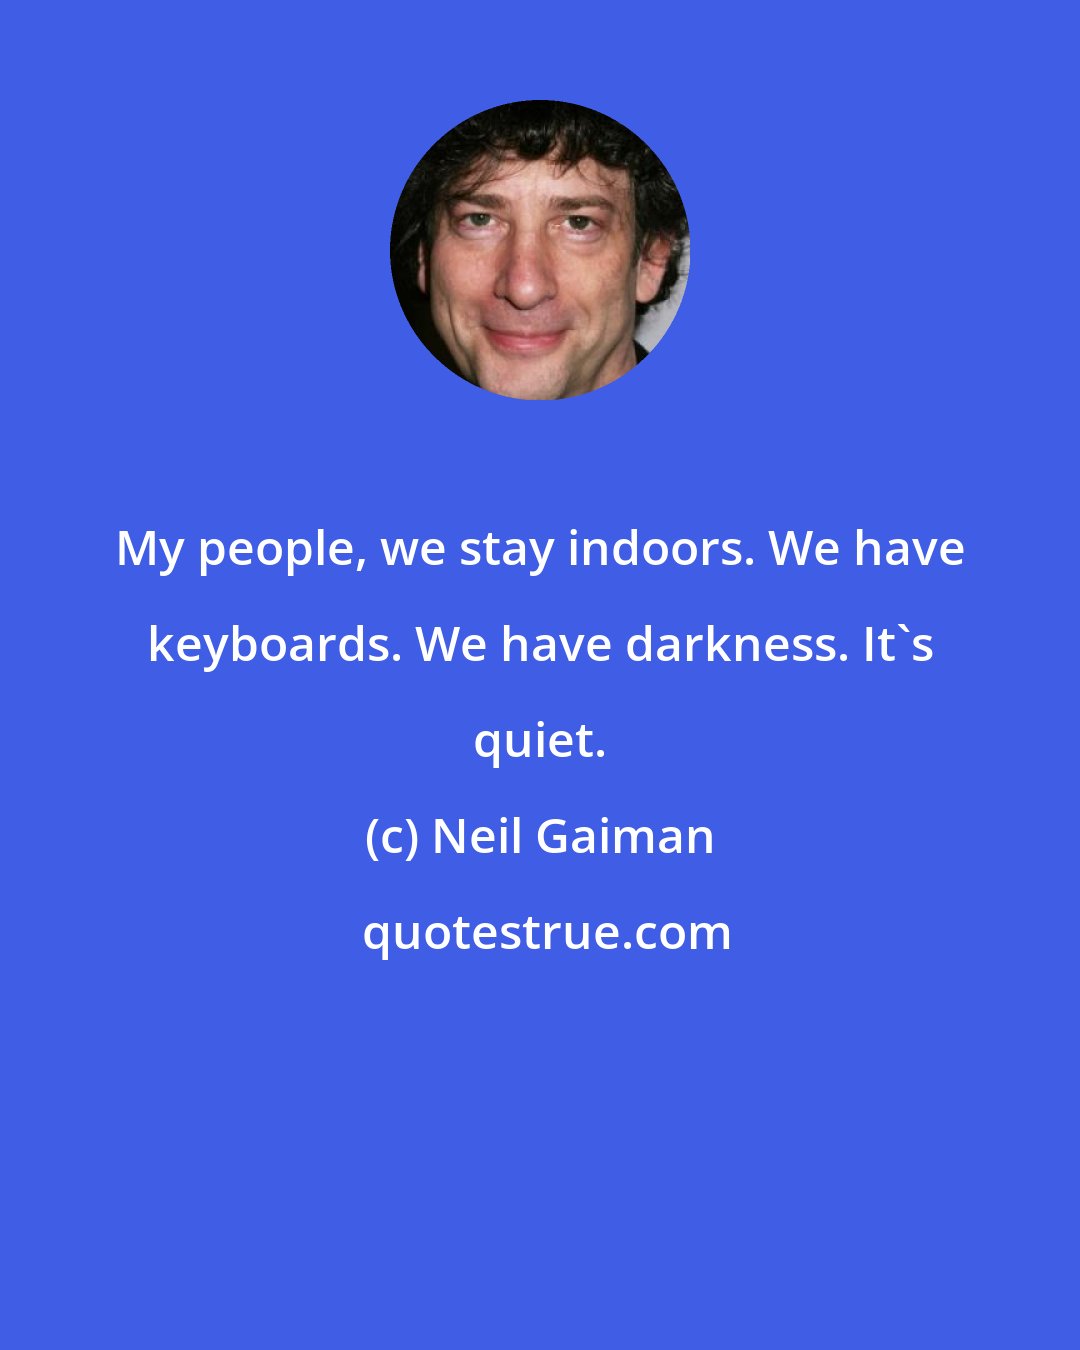 Neil Gaiman: My people, we stay indoors. We have keyboards. We have darkness. It's quiet.